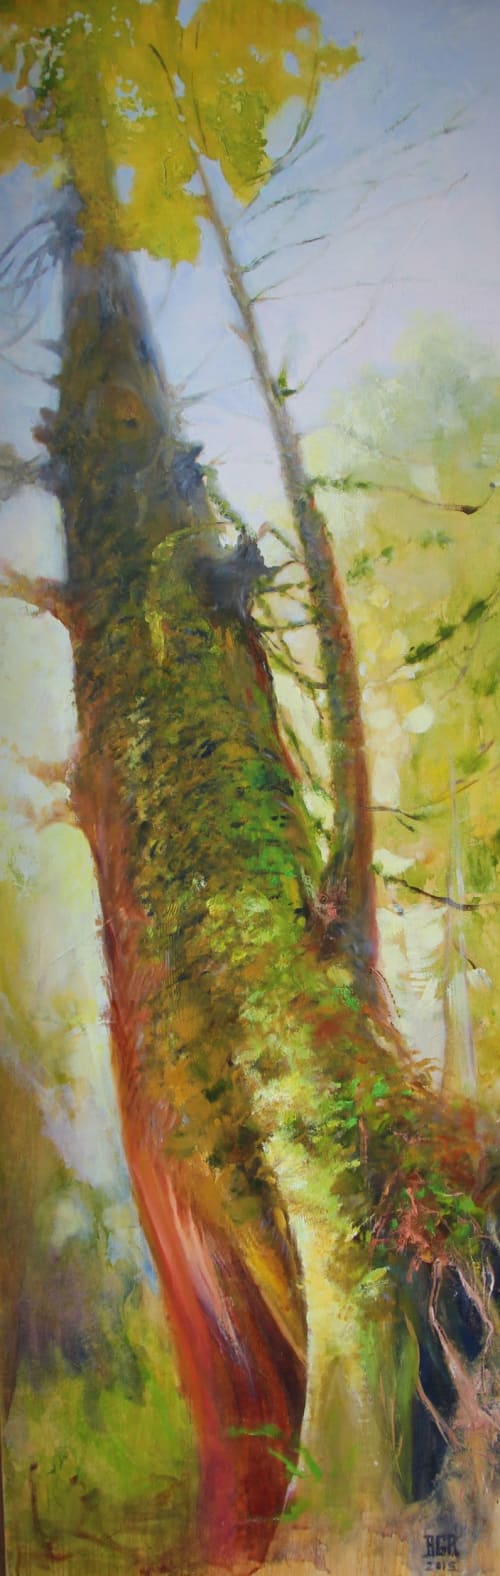 Oldgrowthforest Tree | Oil And Acrylic Painting in Paintings by Art by Bgr / Benedicte Grange Rogulski